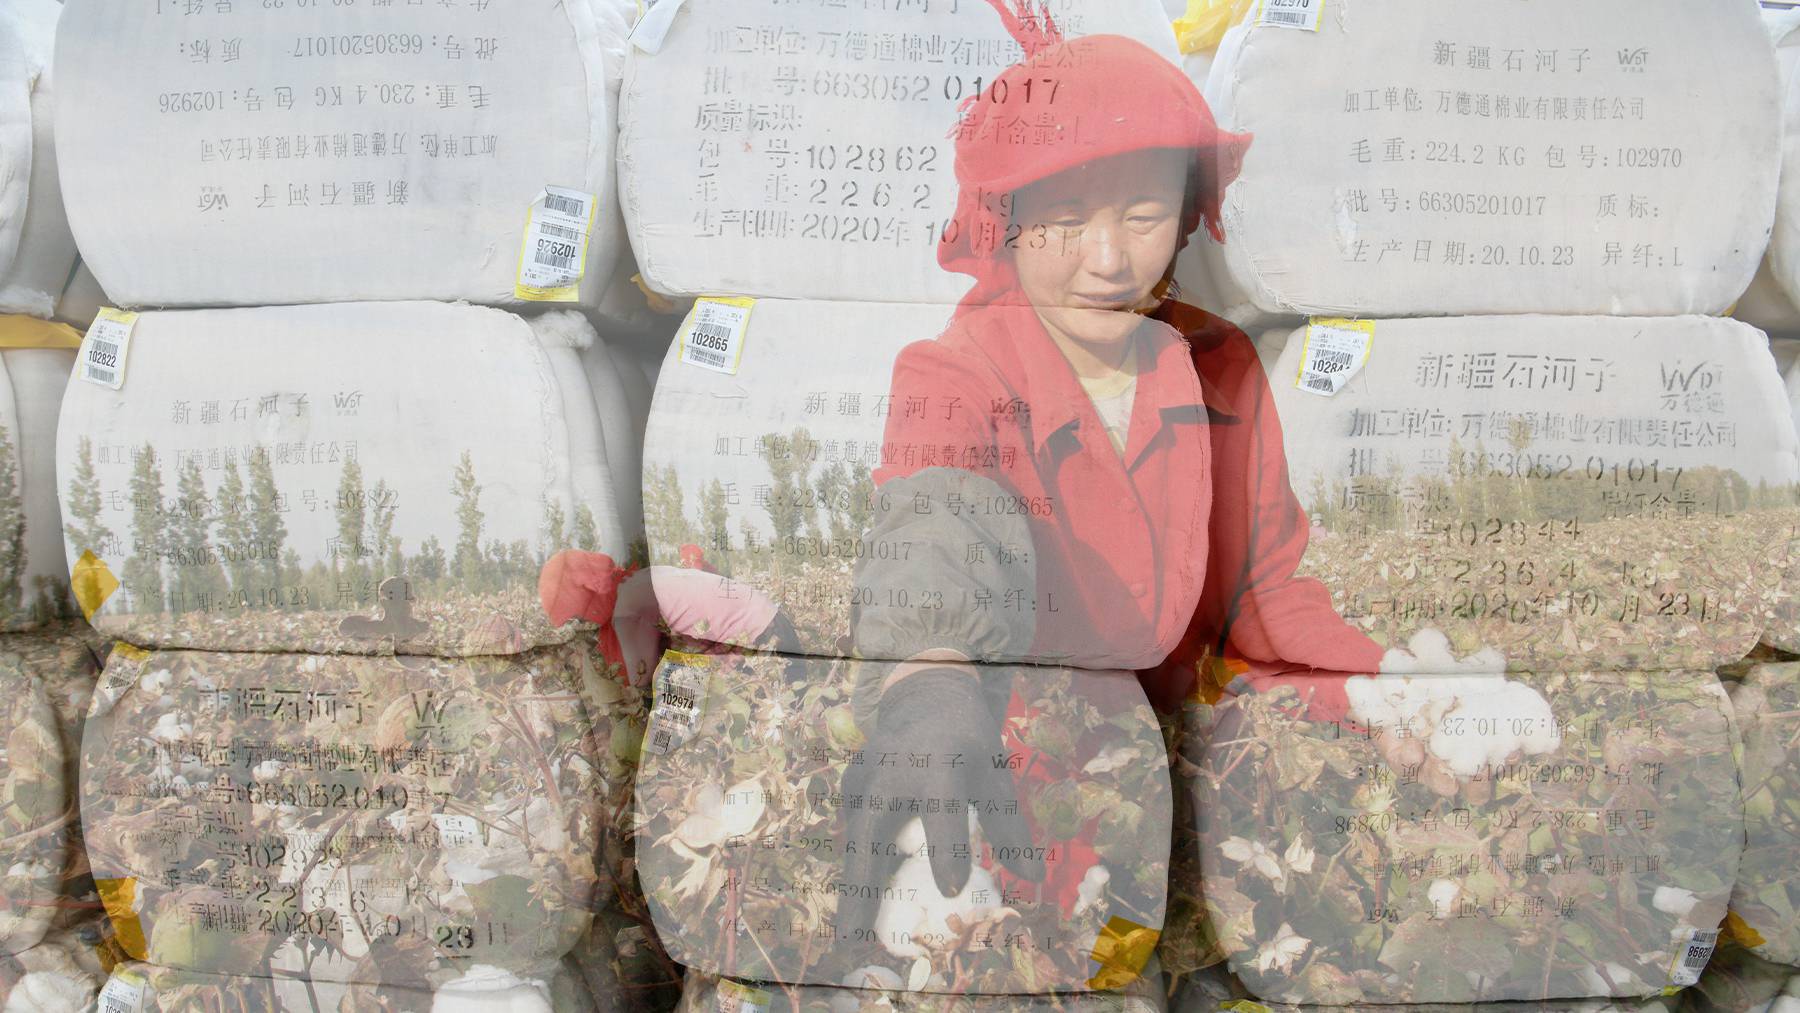 A farmer picks cotton on a farm on the outskirts of Hami, Xinjiang Region. Overlayed with a view of lint cotton from Shihezi in Xinjiang at a railway freight station in Jiujiang in central China.